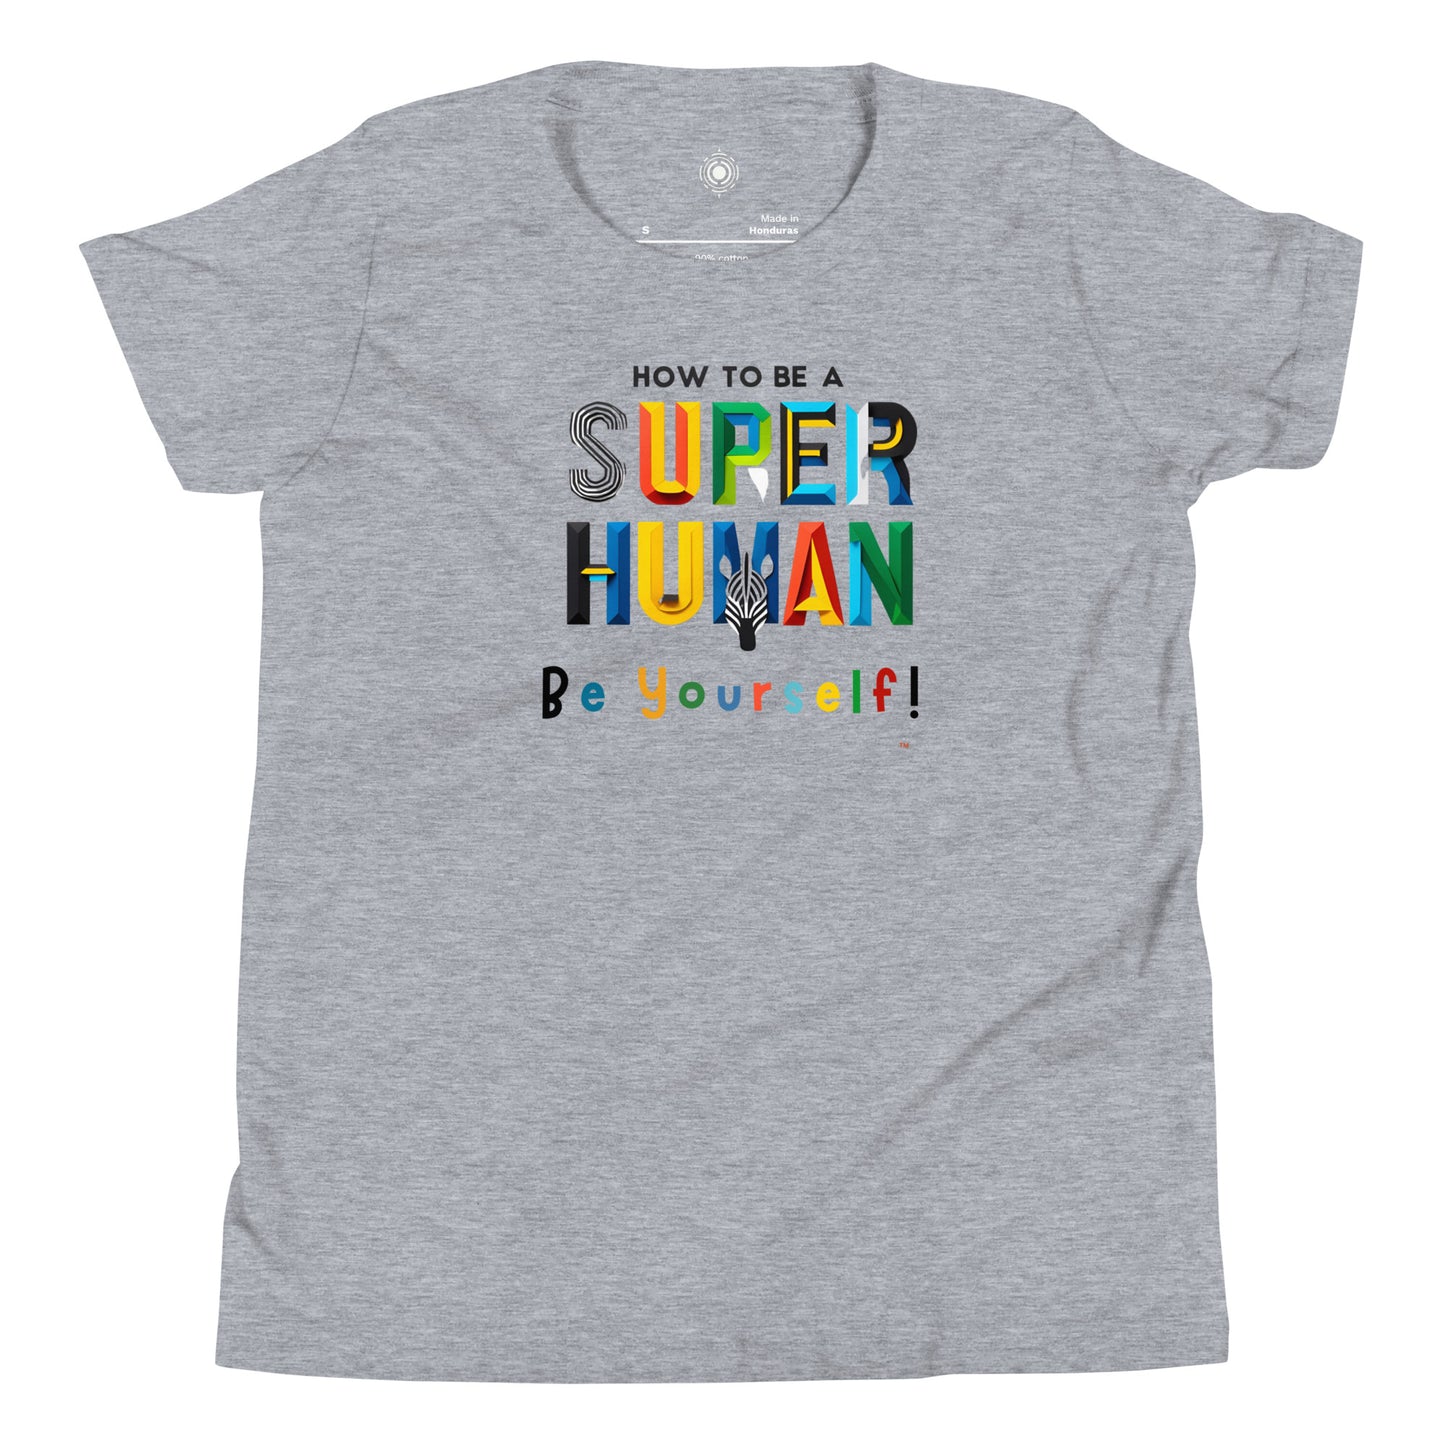 Carpe Diem Gear | "How to be a SUPER Human" | Be Yourself! | Youth 100% Ring-Spun Cotton Short Sleeve T-Shirt